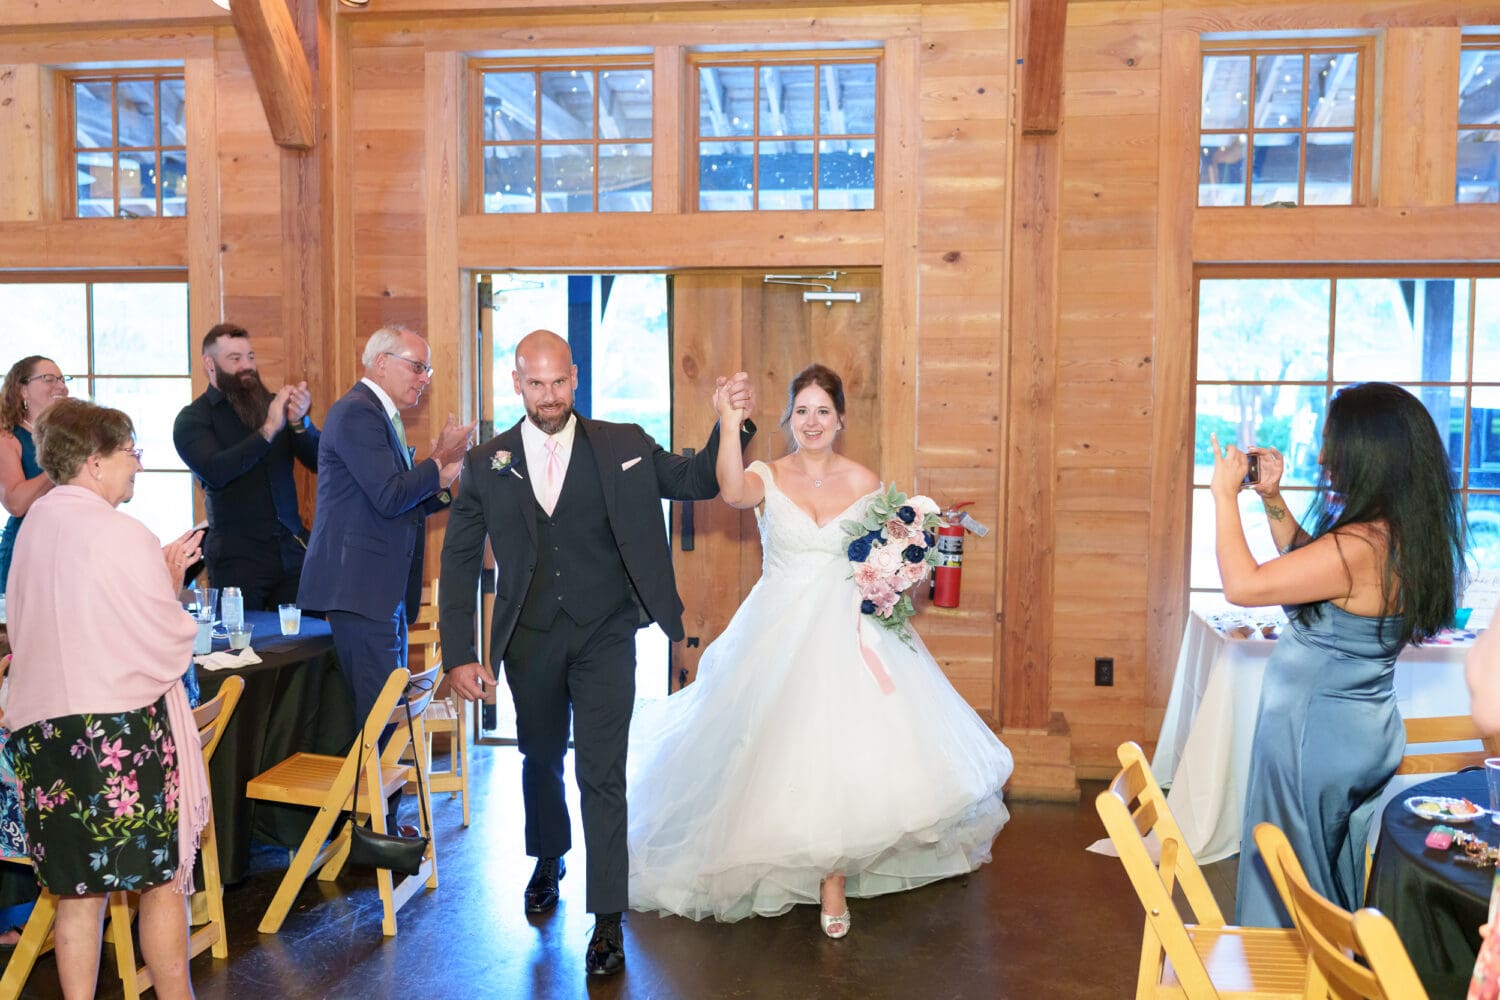 Wedding introductions - The Pavilion at Pepper Plantation